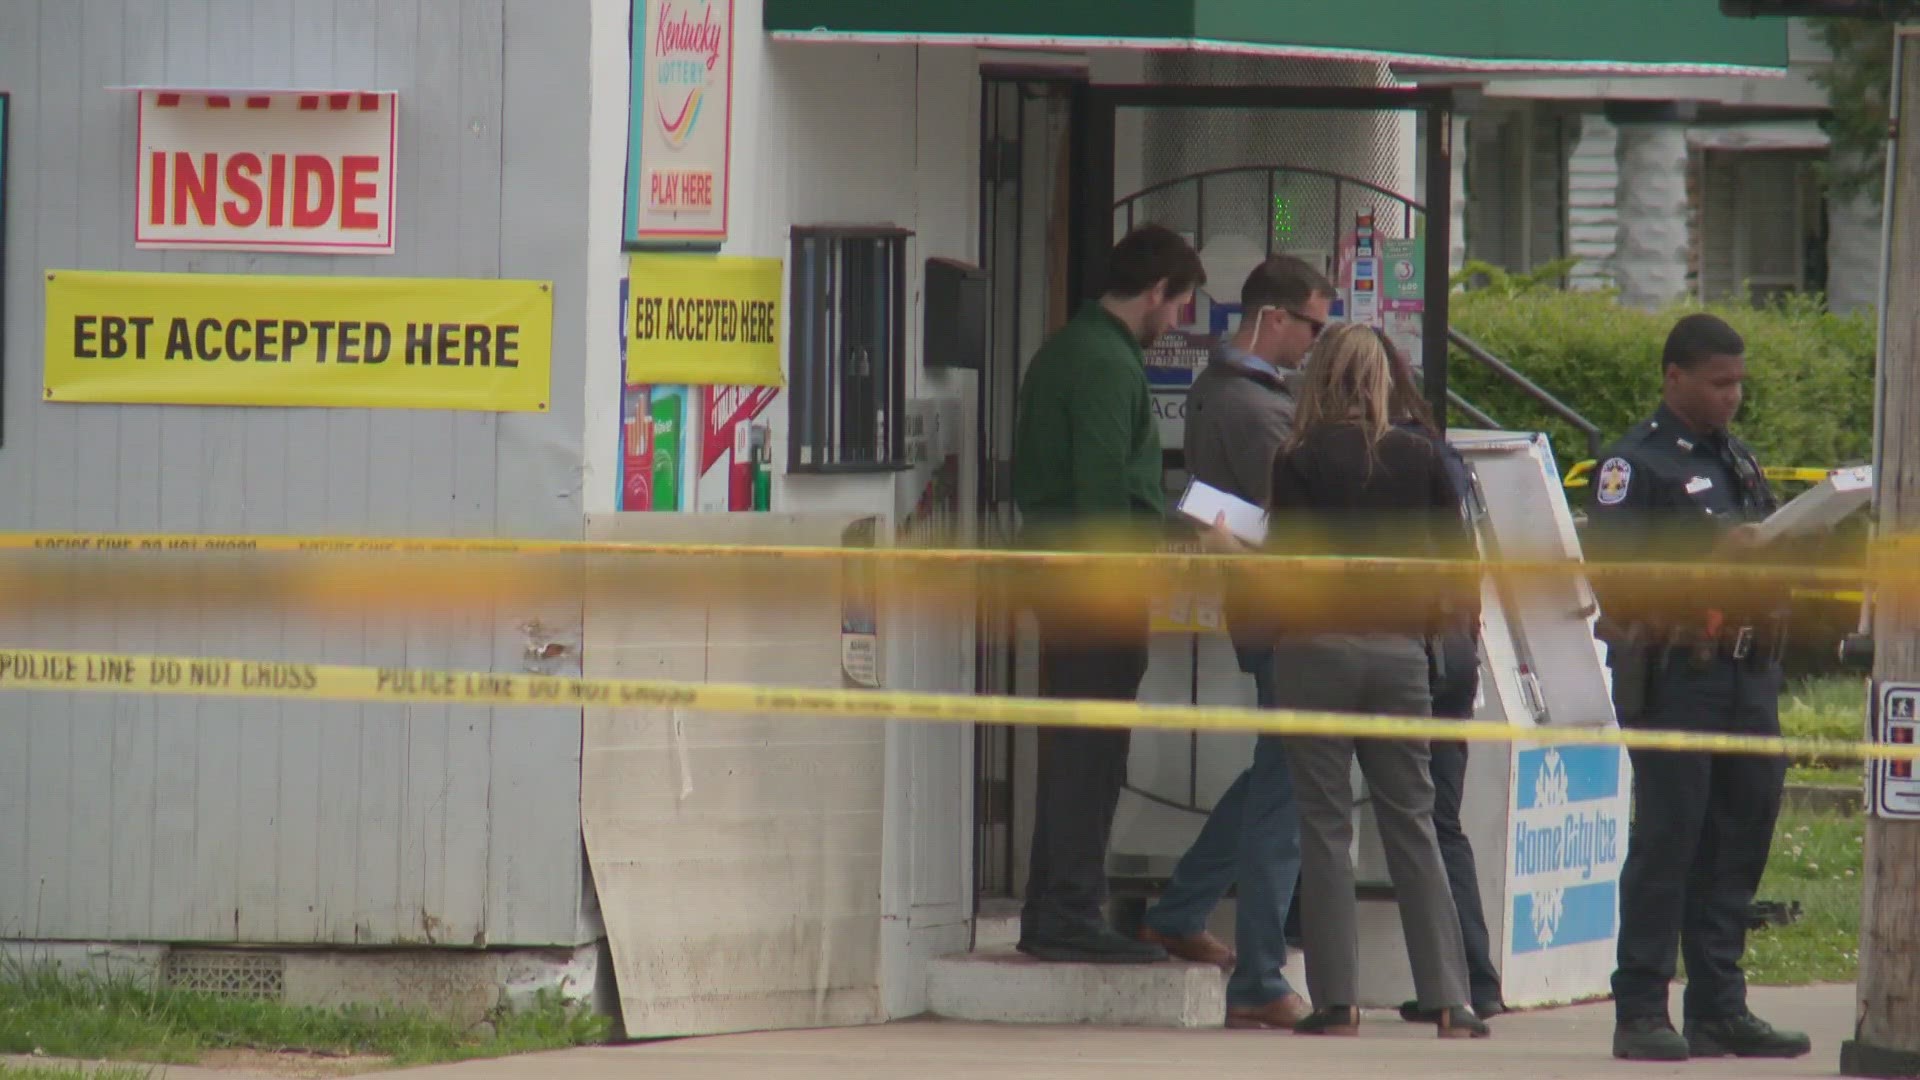 Officers found a man suffering from multiple gunshot wounds Tuesday afternoon inside a corner store.